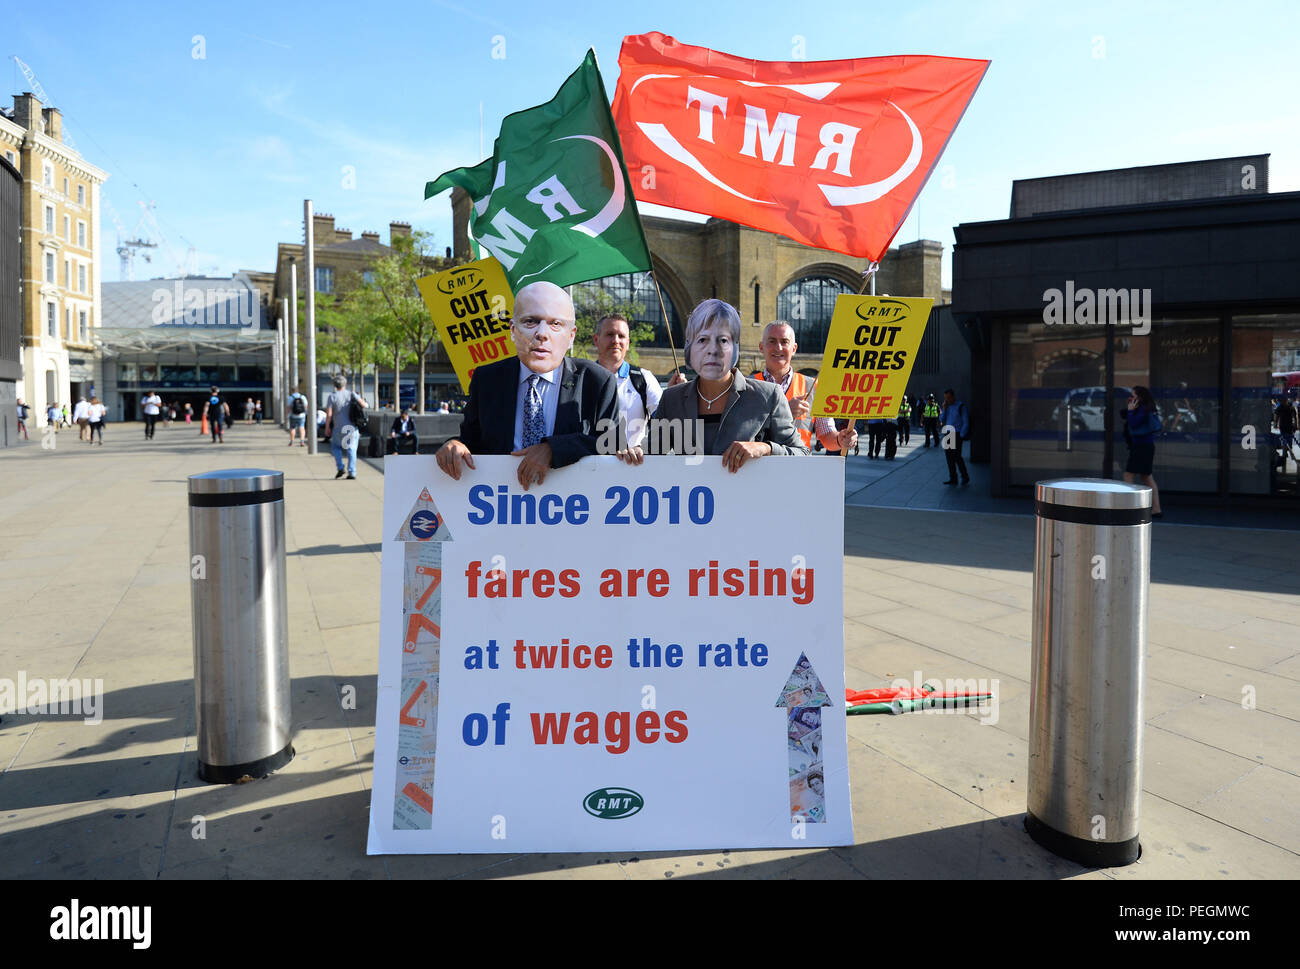 Members of the Rail, Maritime and Transport union (RMT) dressed as Prime Minister Theresa May and Transport Secretary Chris Grayling take part in a protest over train fares outside King's Cross station in London. Stock Photo